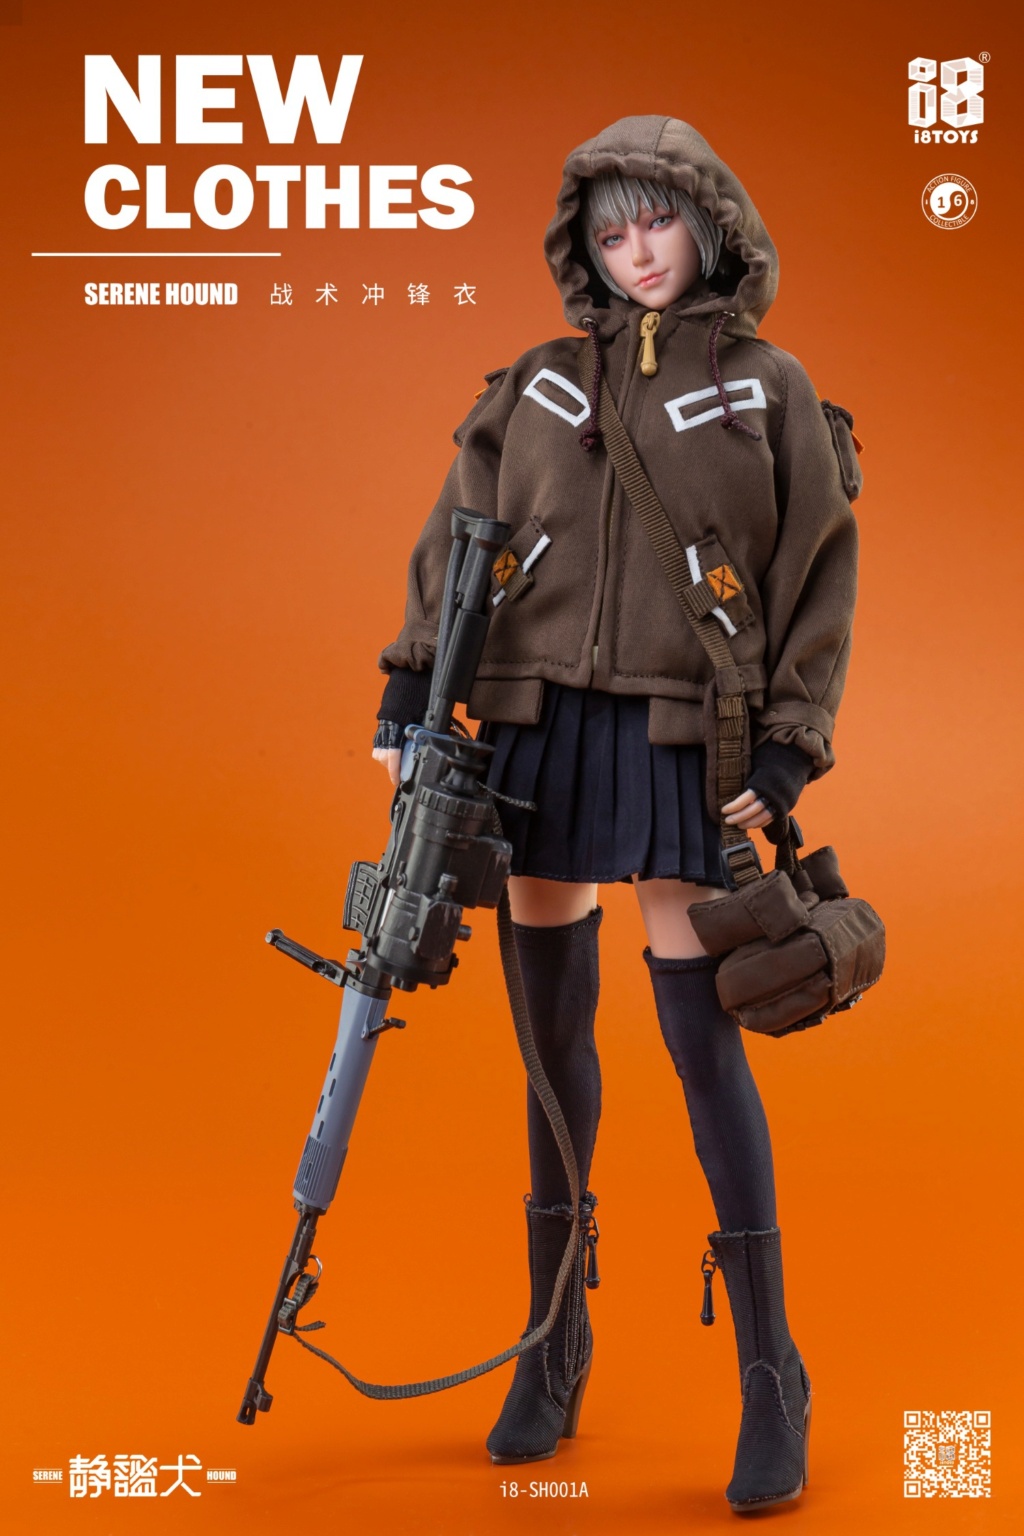 clothing - NEW PRODUCT: I8 Toys: Original Series 1/6 Serene Hound New Clothes - Tactical Assault Clothing 15440110